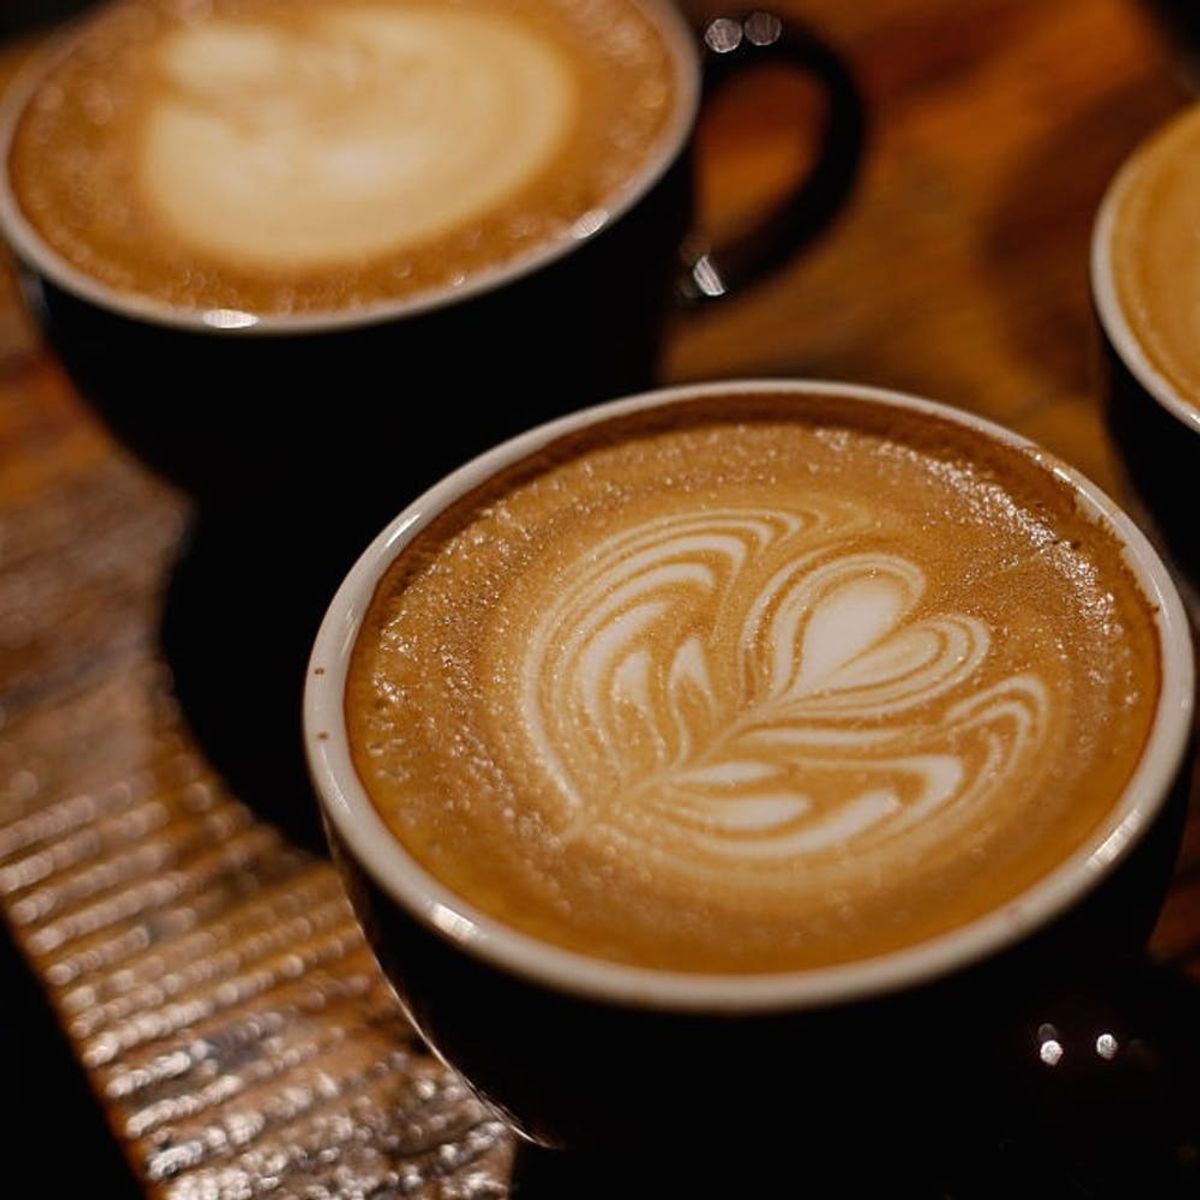 DIY Latte Art? There’s an App For That